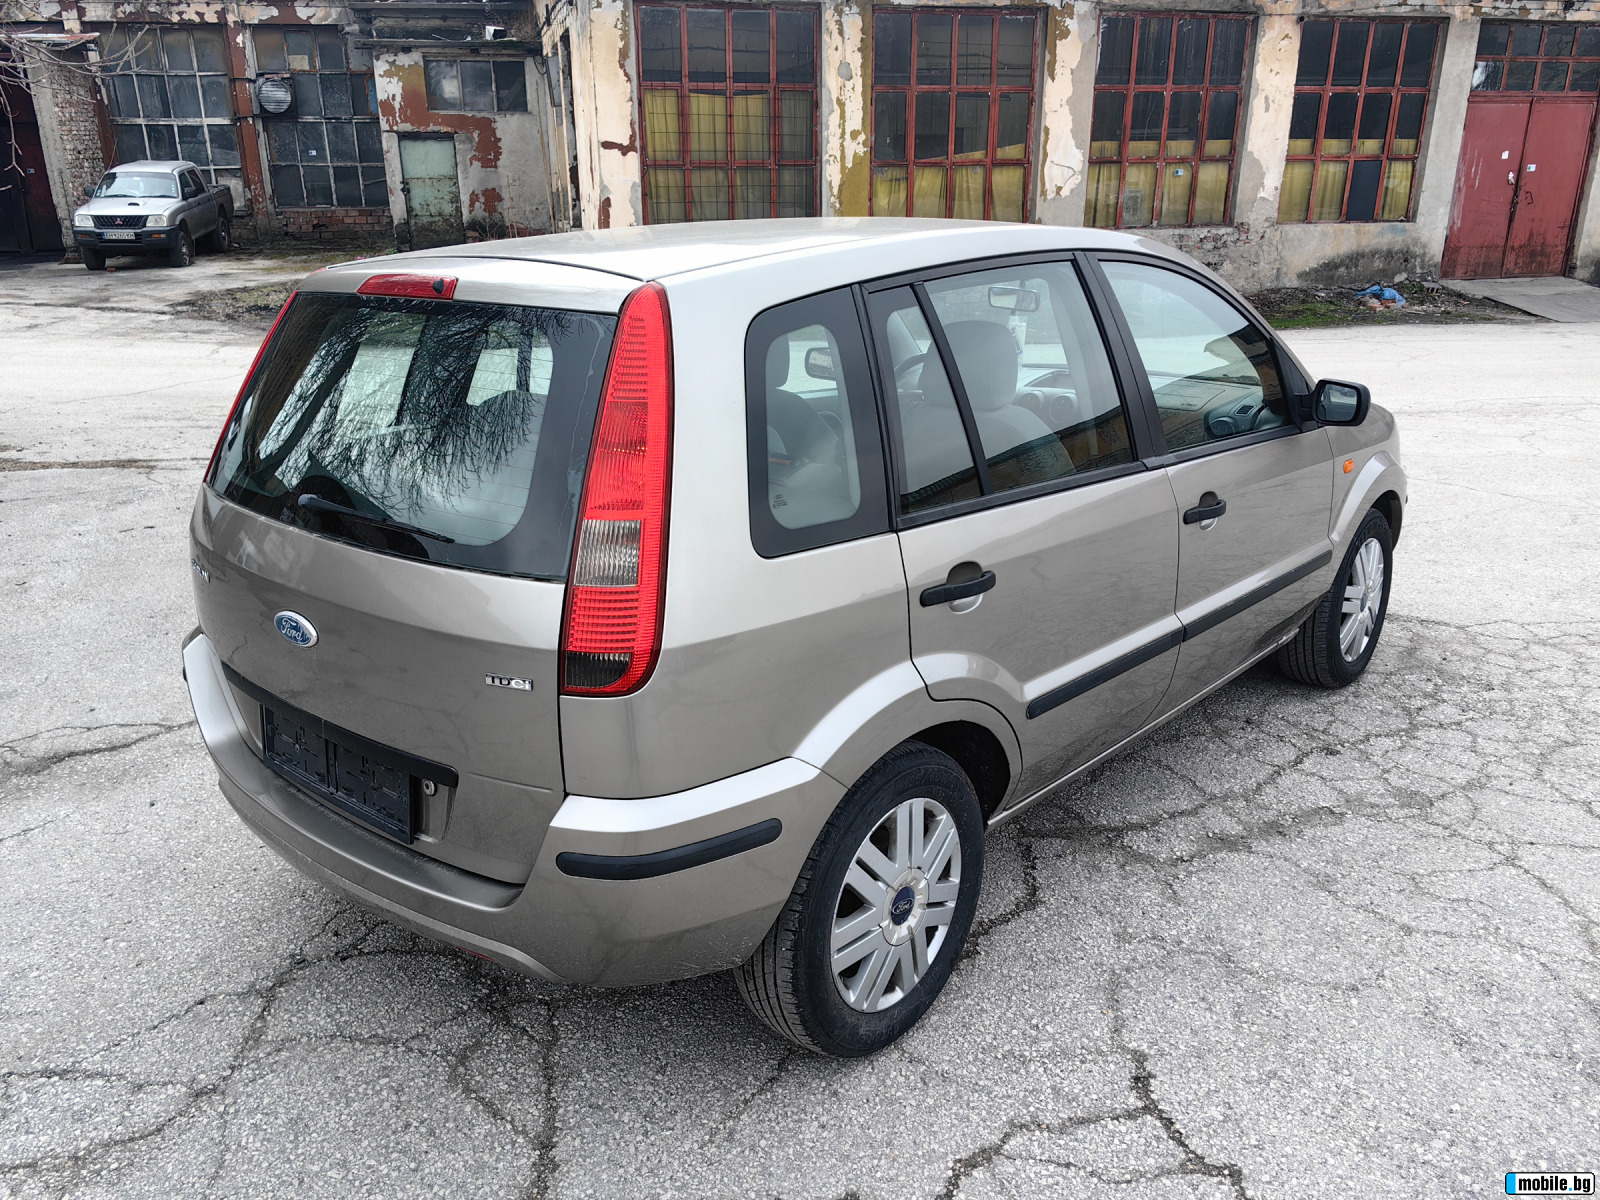 Ford Fusion 1.4 hdi 68ps | Mobile.bg   4